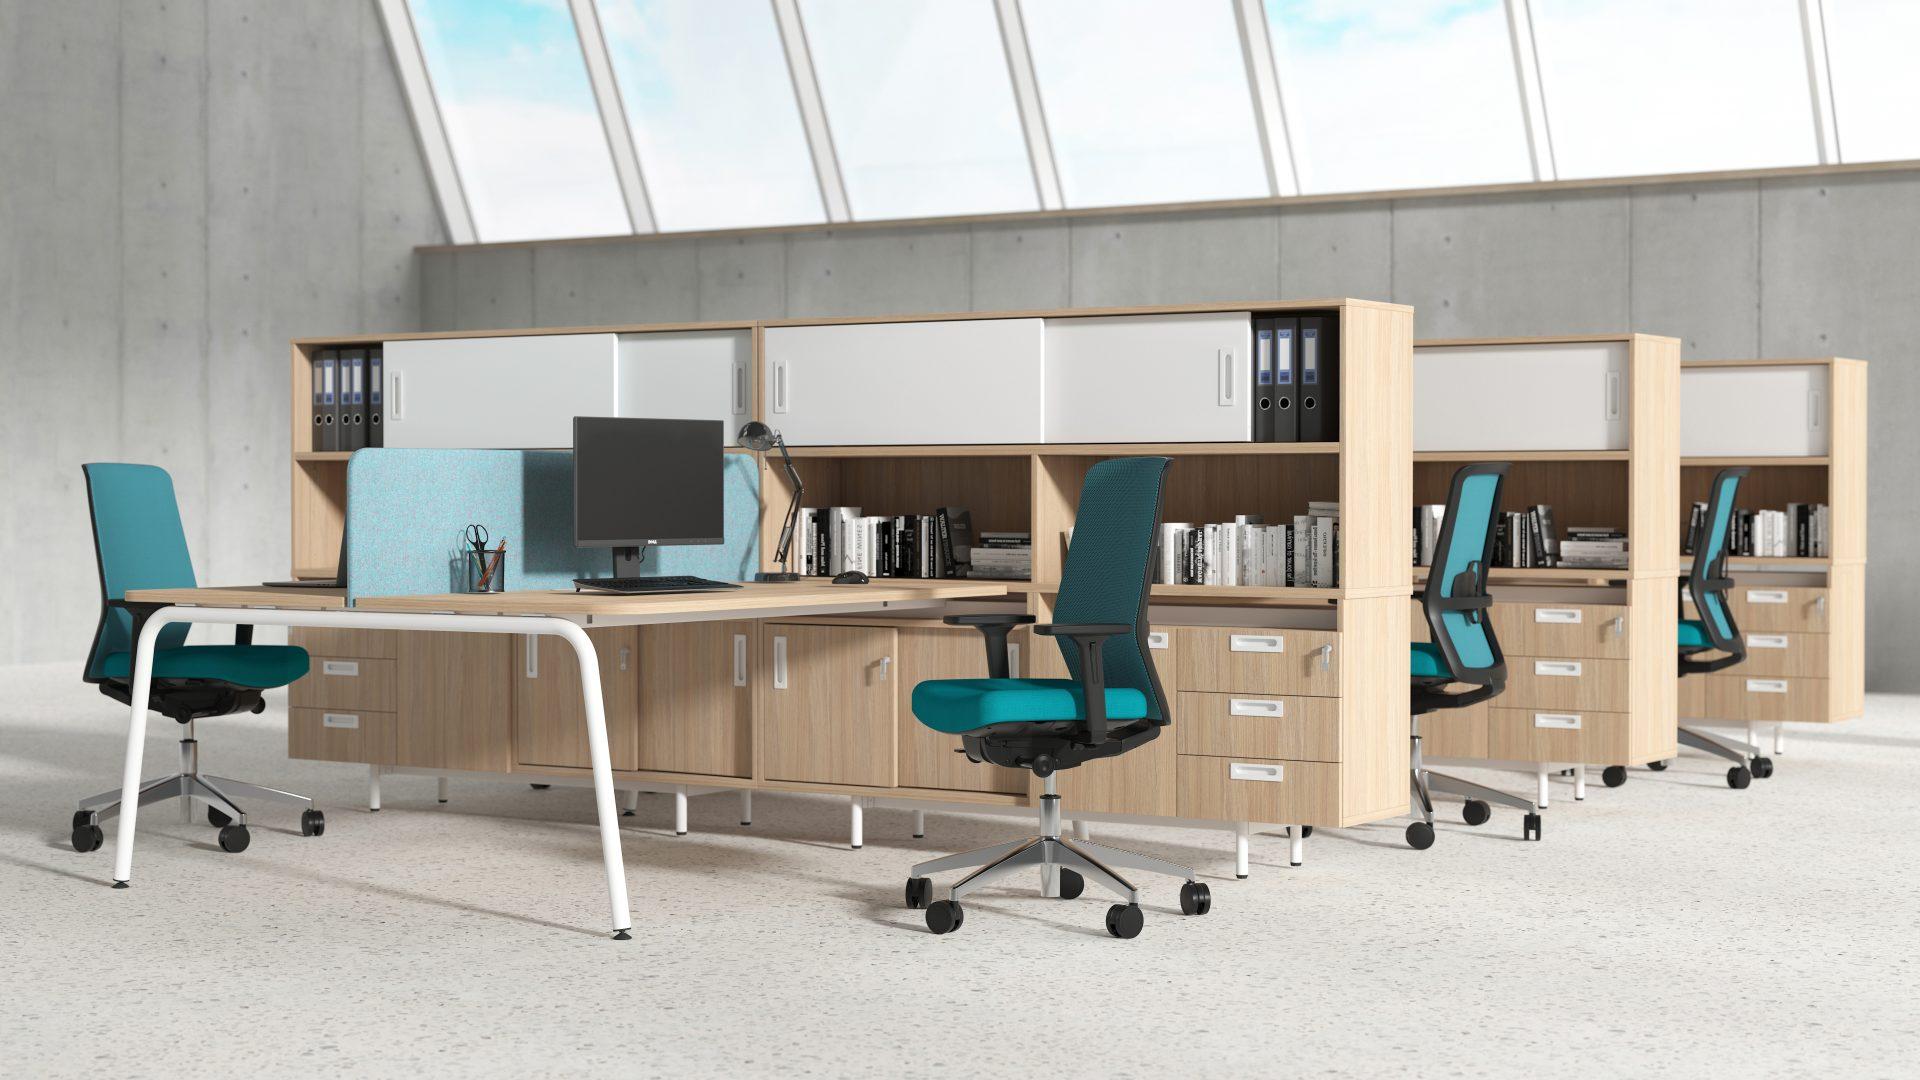 Bank of Office workstations with integrated tall personal storage offering visual and acoustic privacy for high concentration focussed work offering immense value at less than £1,000 per position. From Octopus Interiors London